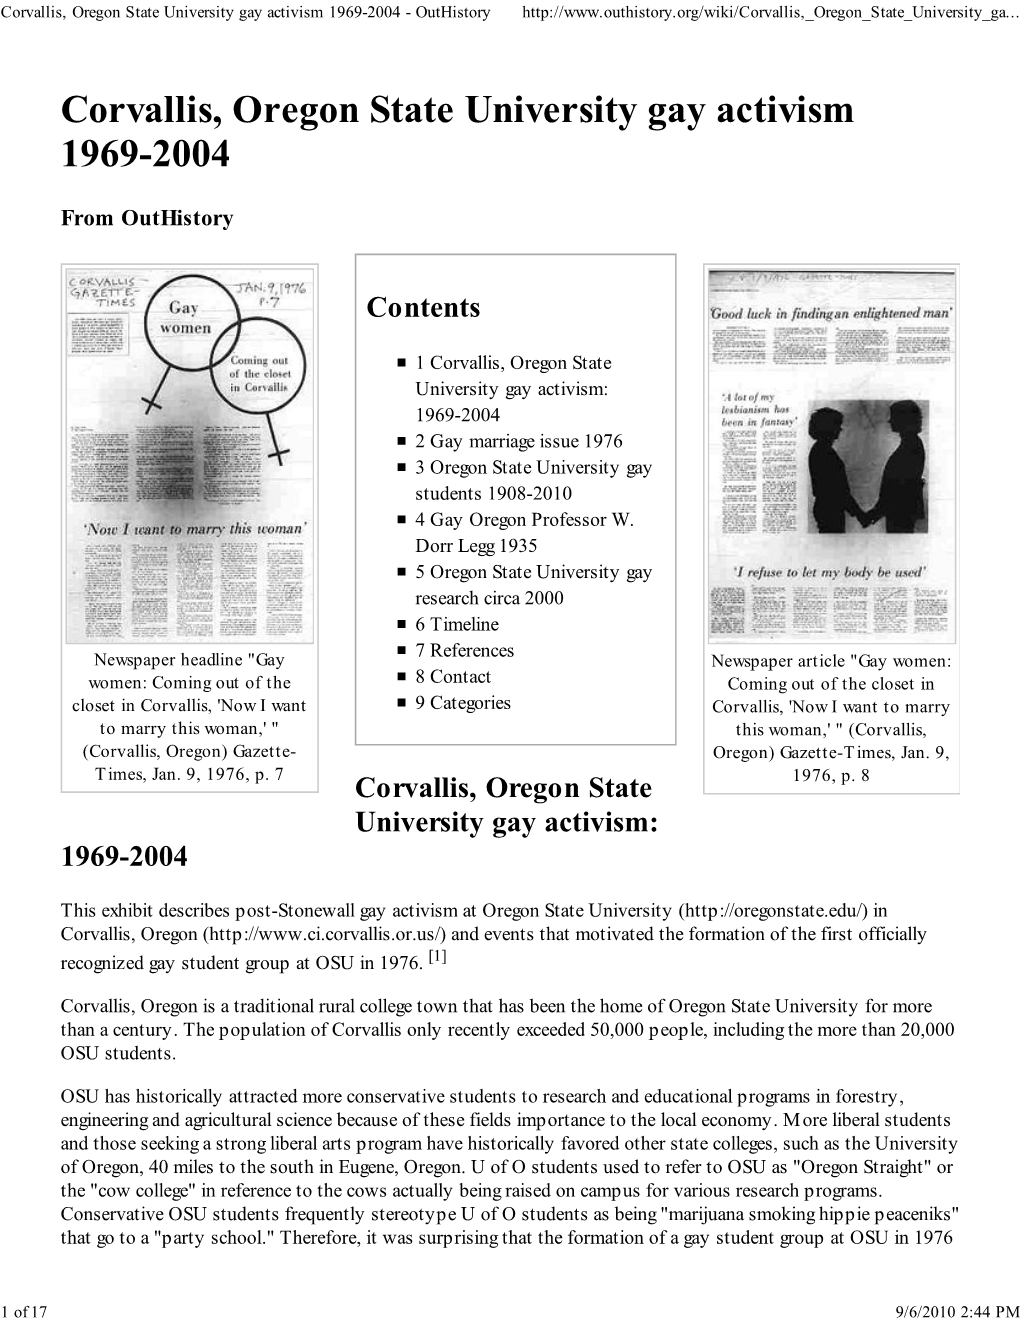 Corvallis, Oregon State University Gay Activism 1969-2004 - Outhistory